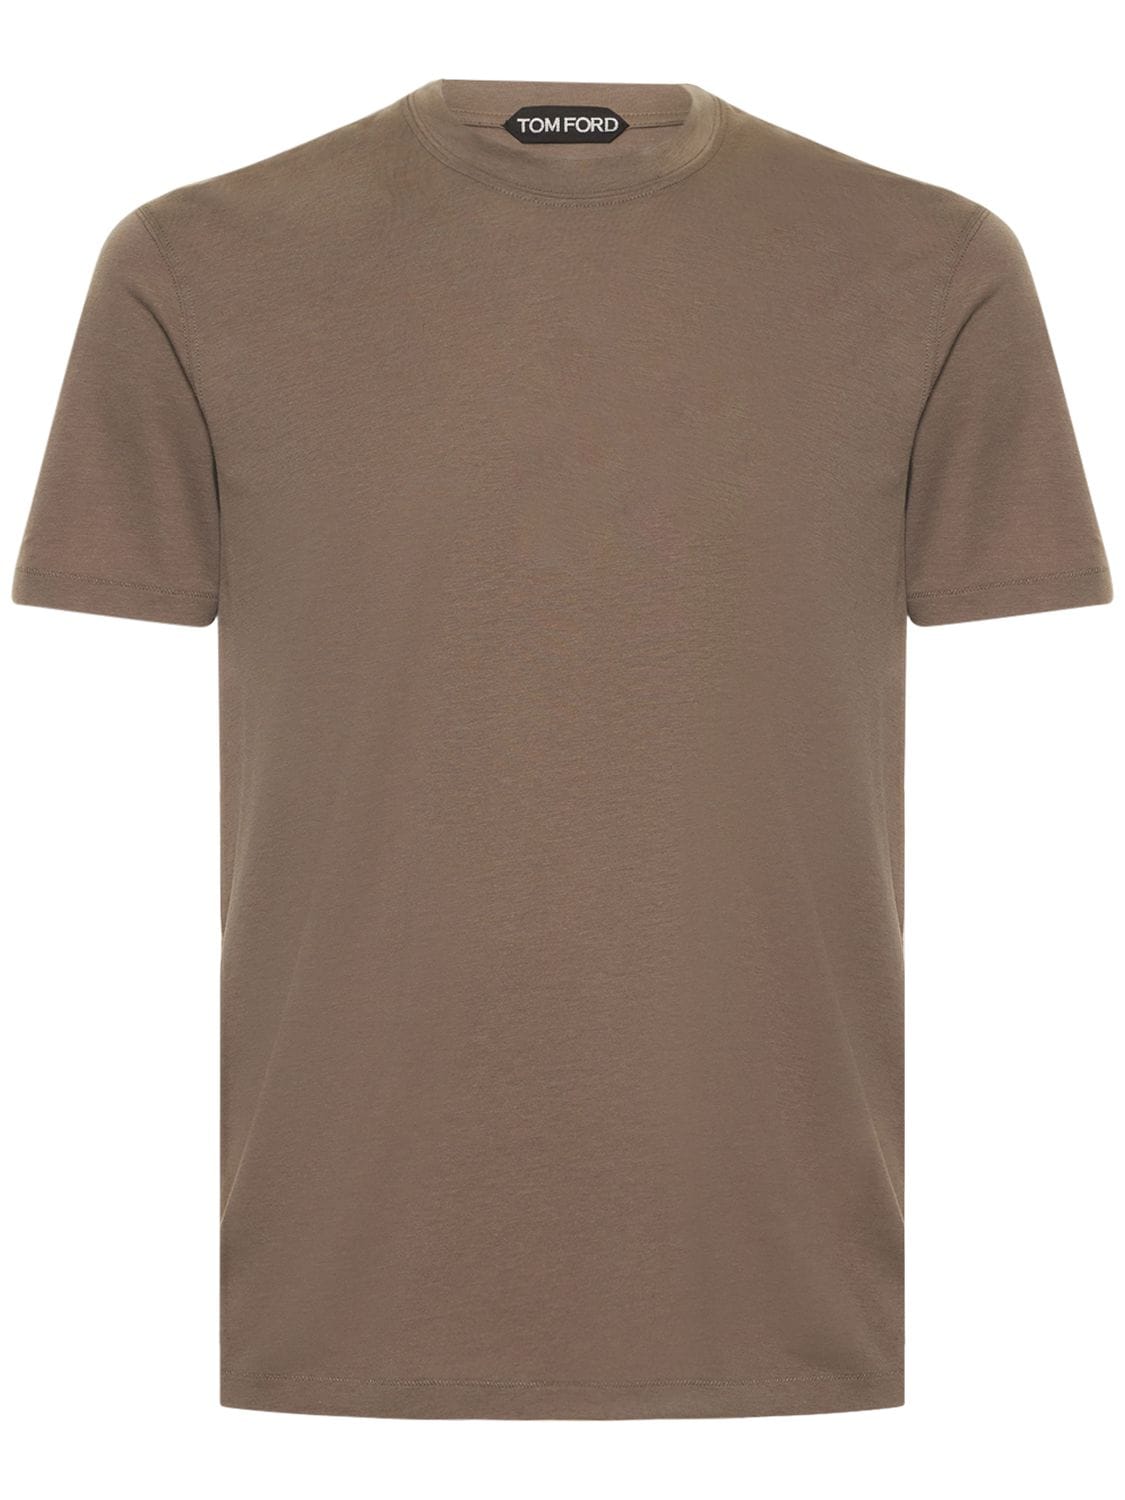 TOM FORD LYOCELL & COTTON JERSEY T-SHIRT